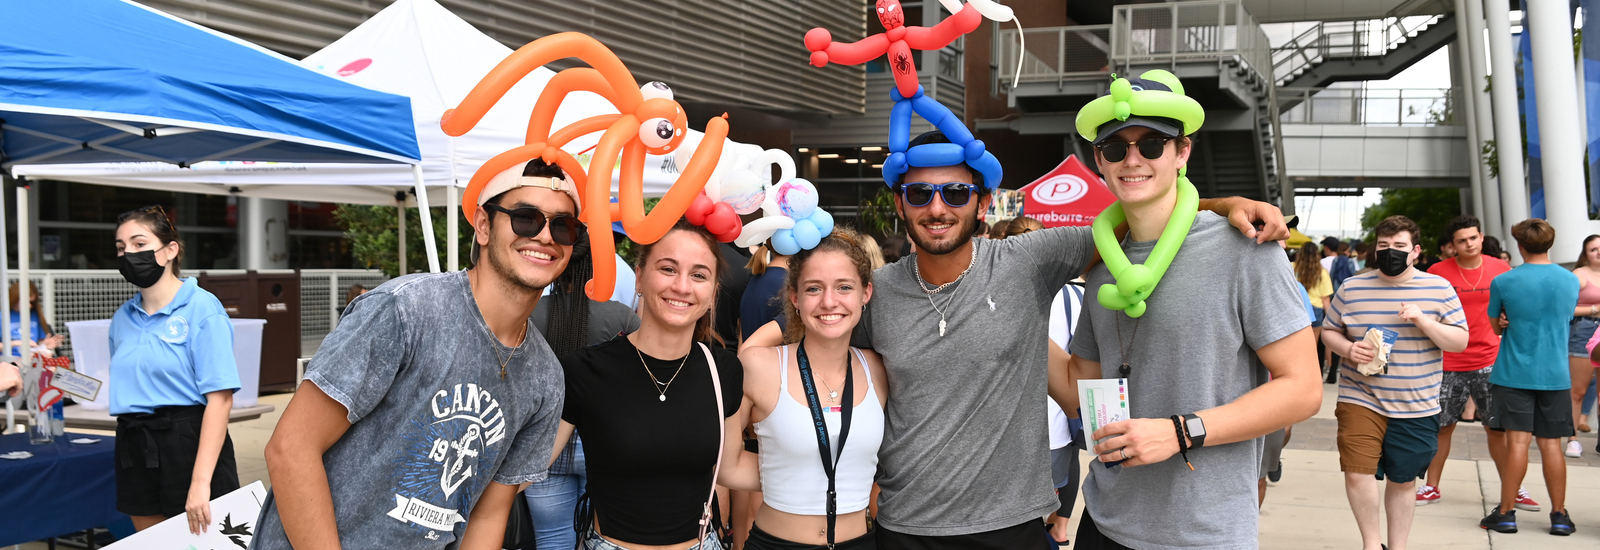 Group of students in the UNF student union plaza with balloon hats on and smiling